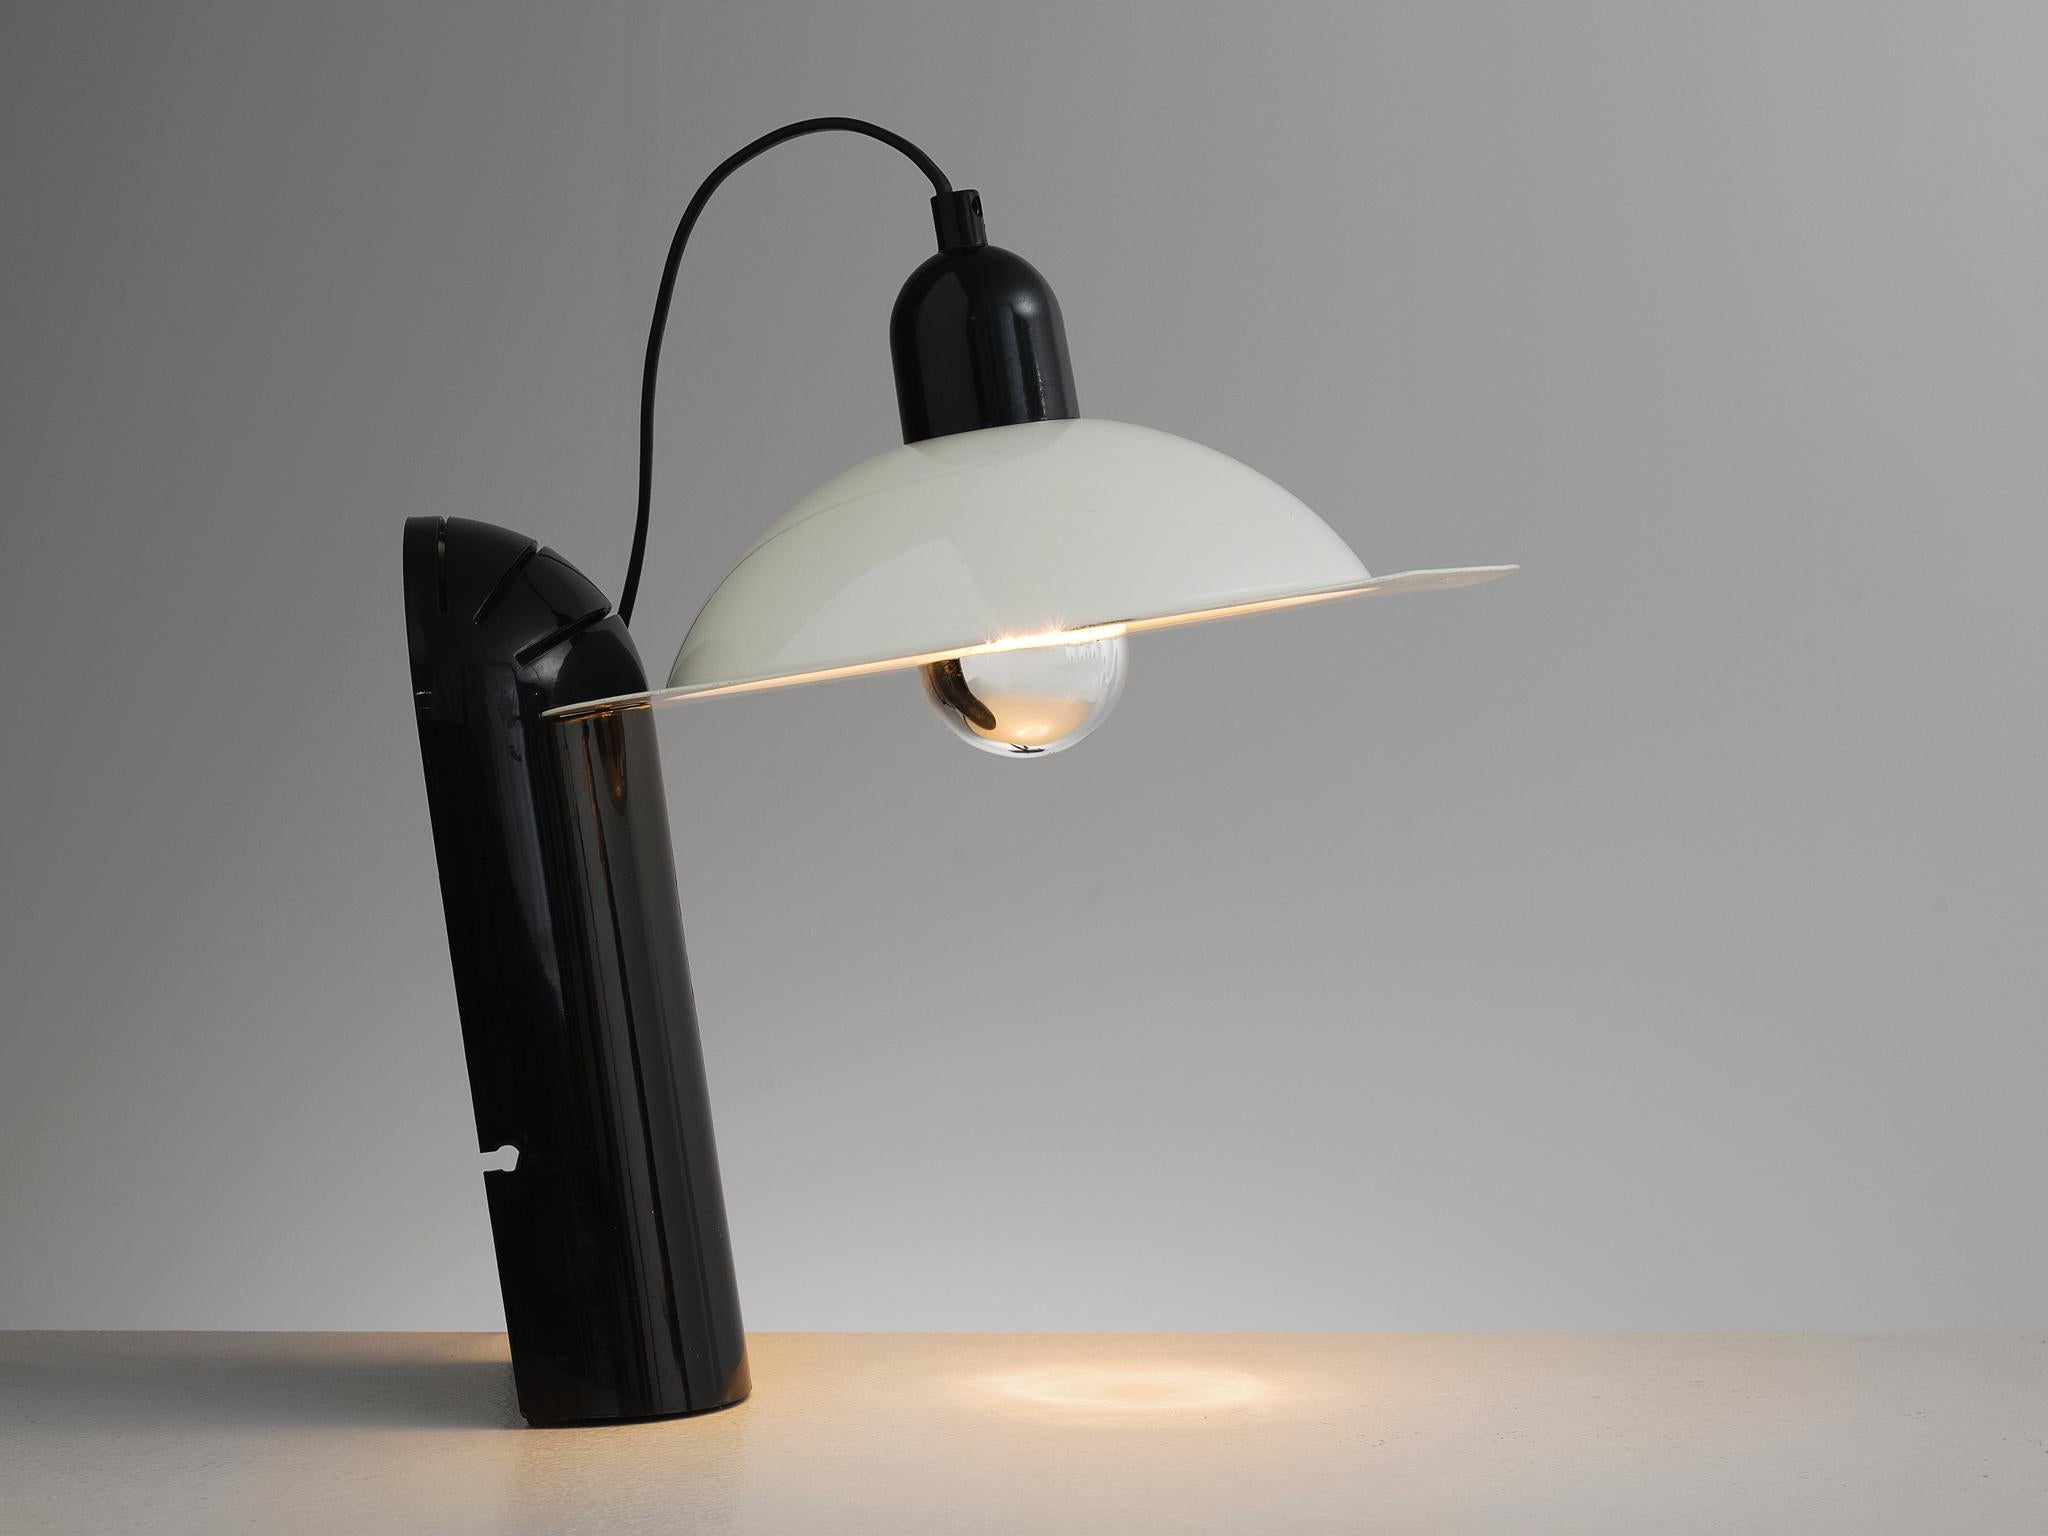 Jonathan de Pas, Donato d'Urbino, and Paolo Lomazzi for Stilnovo, table lamp 'Lampiatta', metal, plastic, Italy, 1971

This postmodern lamp consists out of a white lamp shade and a black base out of plastic. Besides the form the lacquered metal and